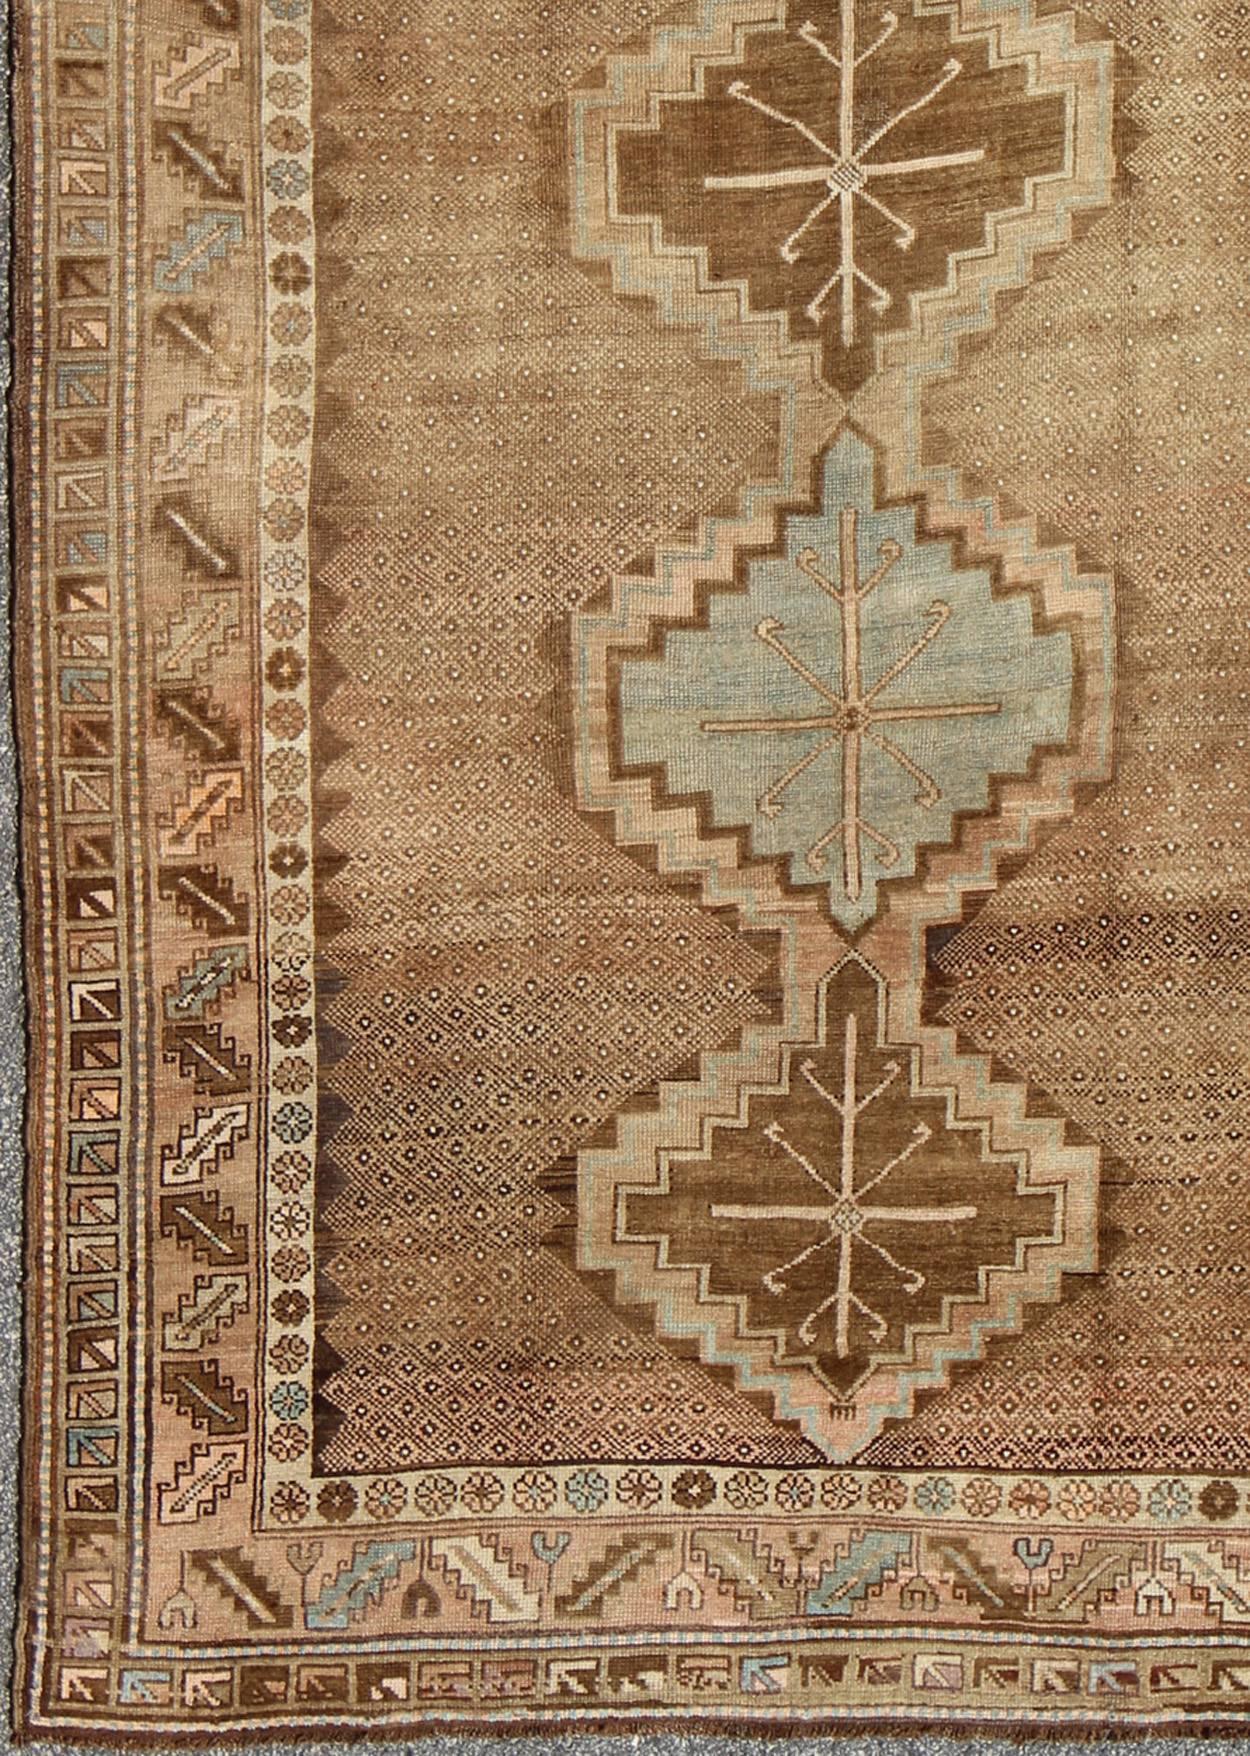 Set on a camel and brown background and accented by neutral cream and light blue, this tribal Turkish Oushak rug showcases five geometric medallions that stretch throughout the entire field of the rug. A multi-tiered border with repeating geometric